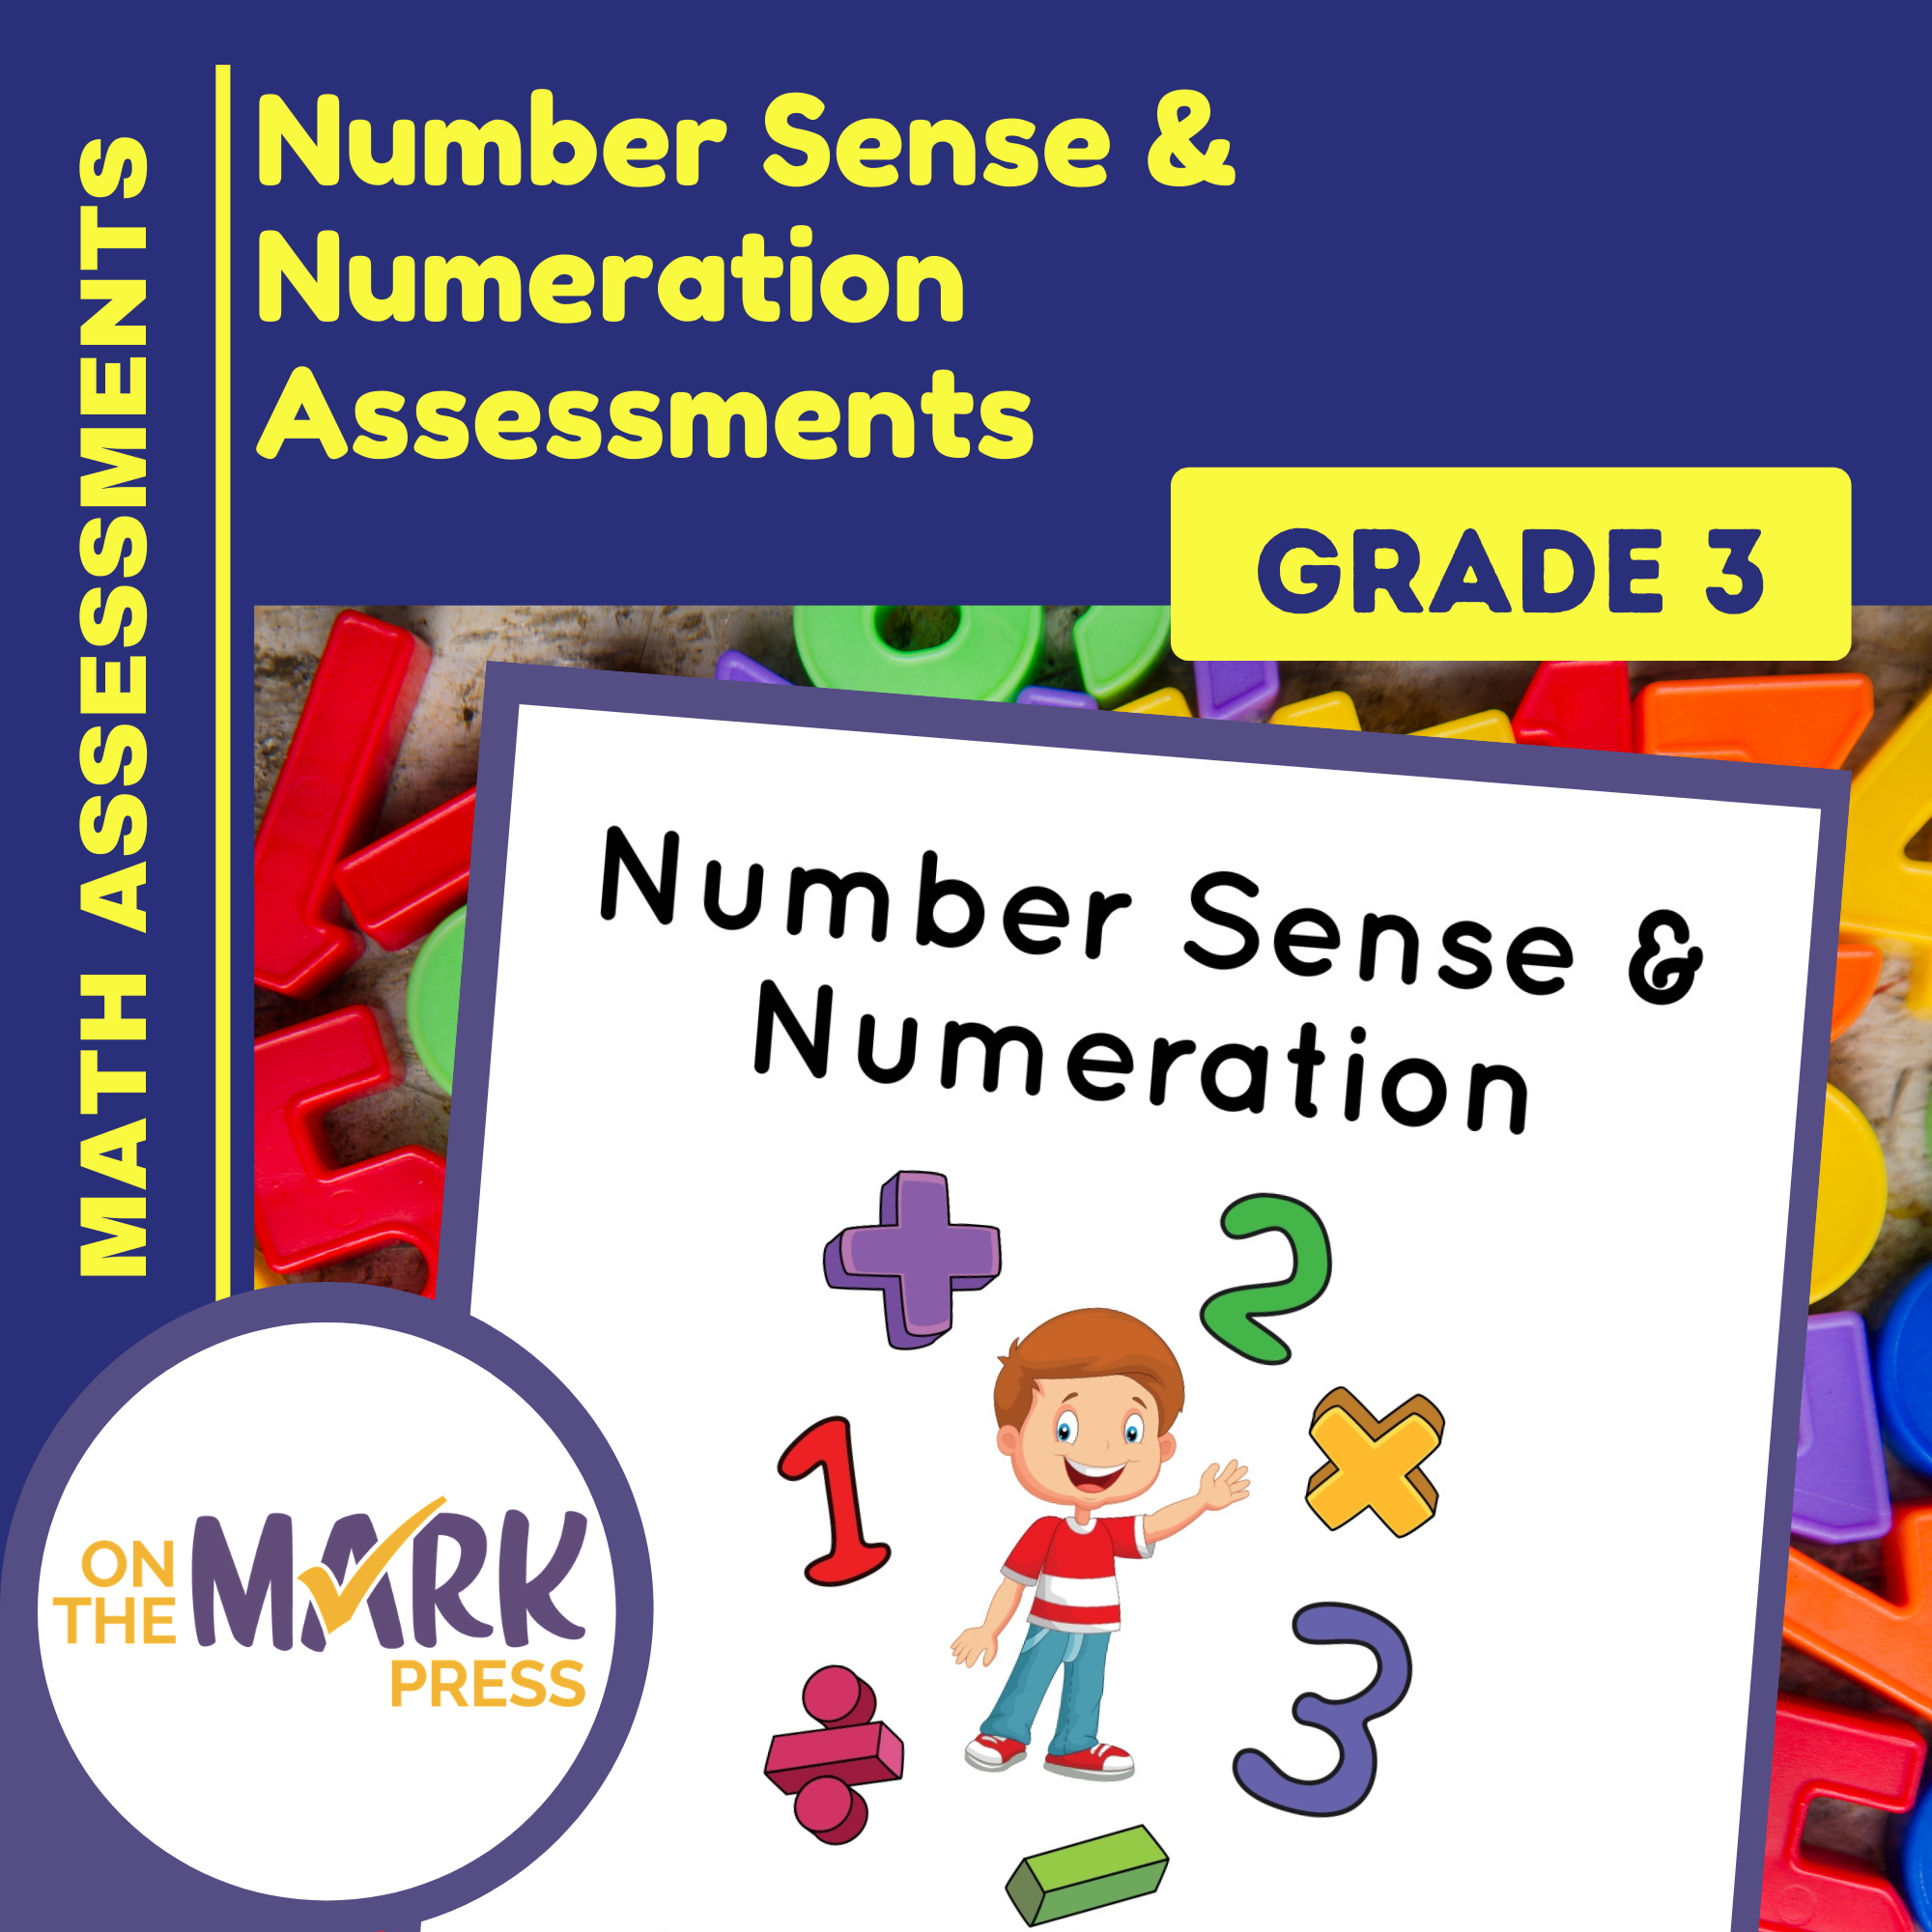 Number Sense and Numeration Assessment Grade 3